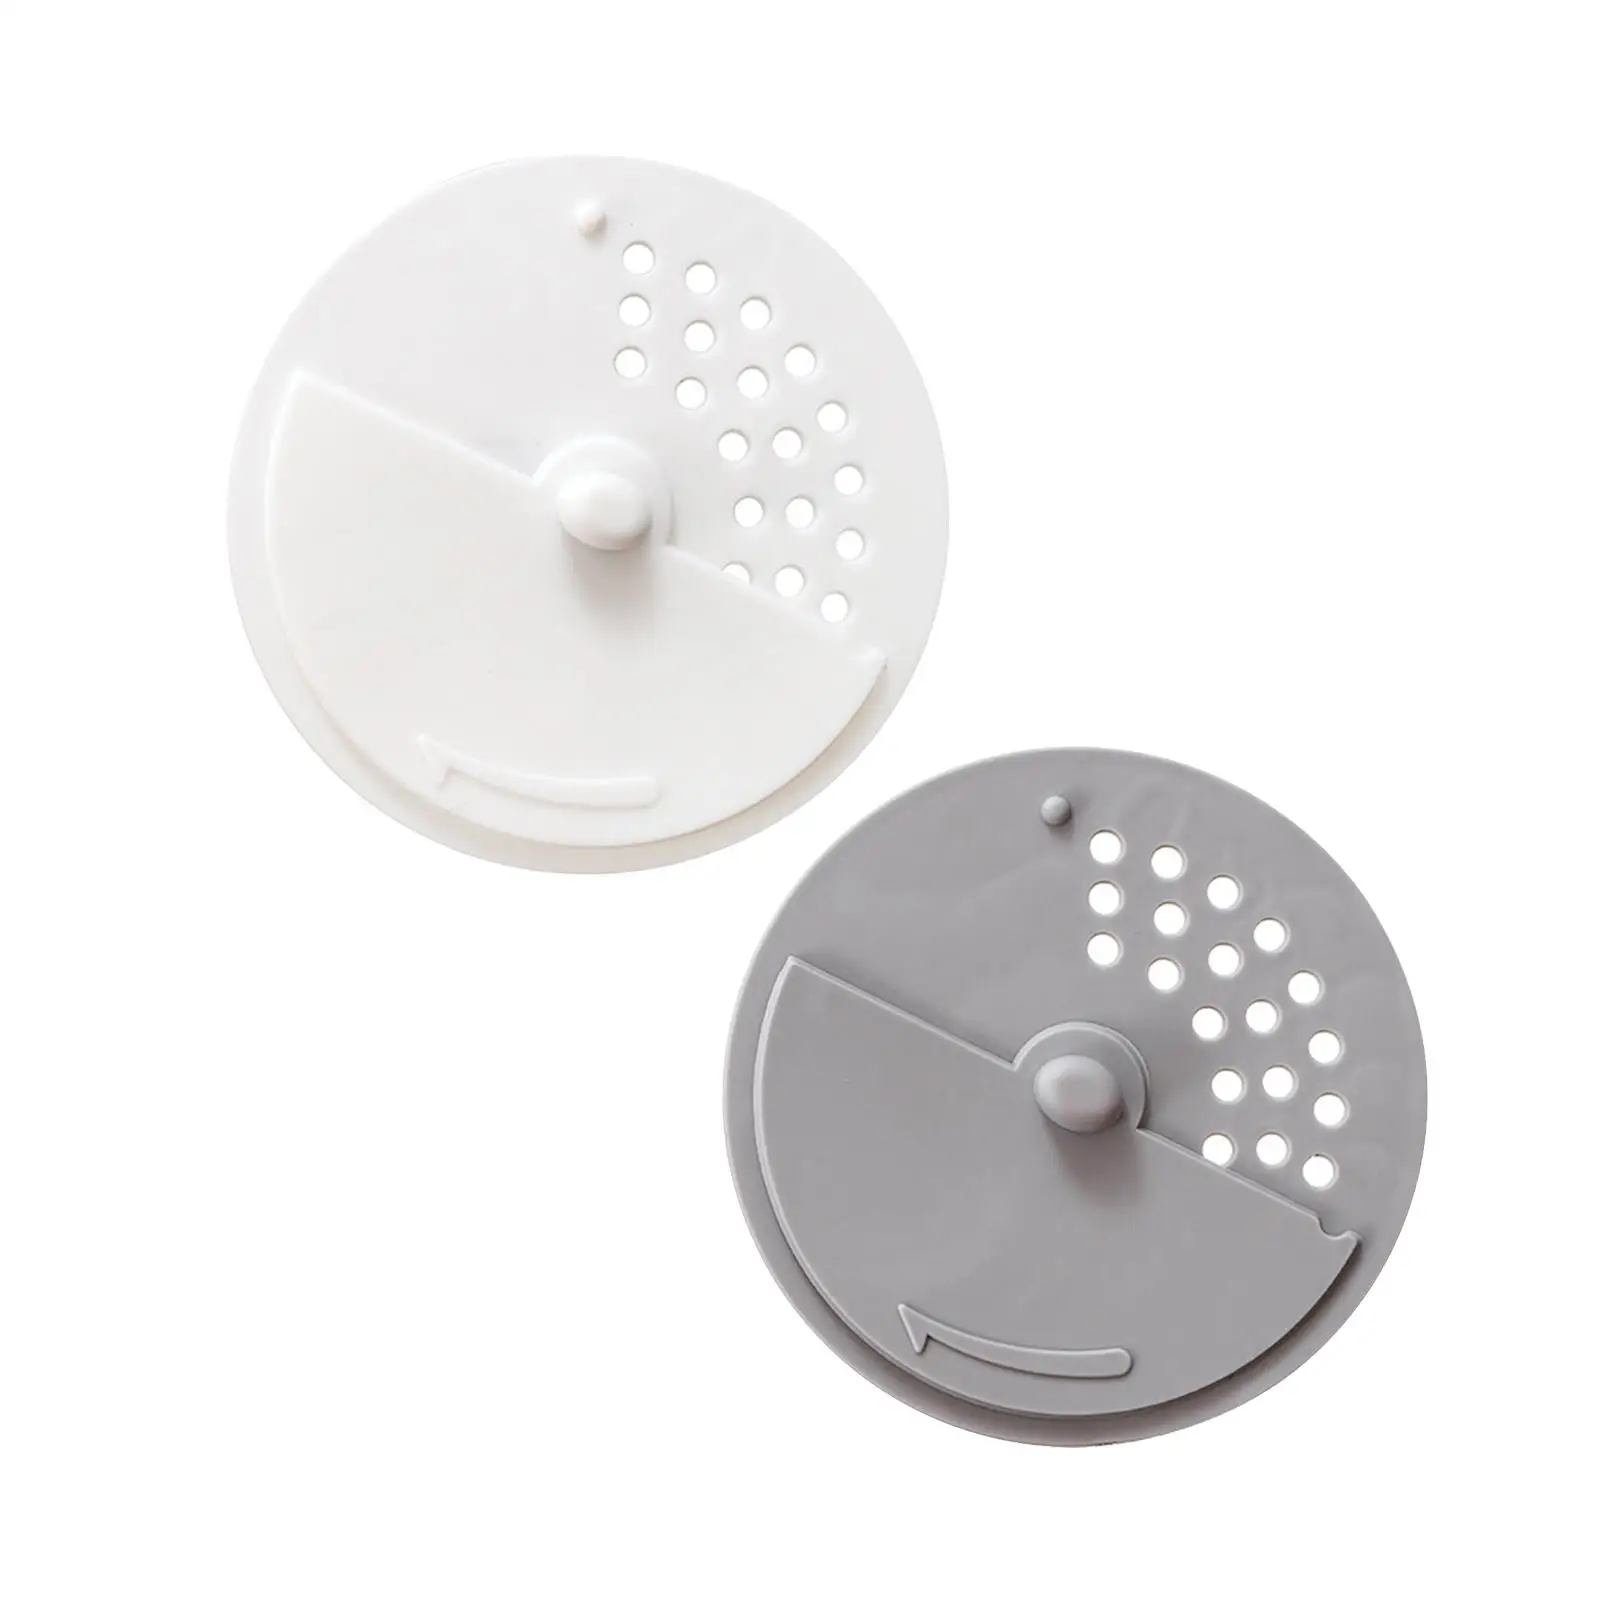 Floor Drain Cover Practical Reusable Durable Anti Blocking Sink Drain Strainer Waste Filter for Dormitory Bathroom Household